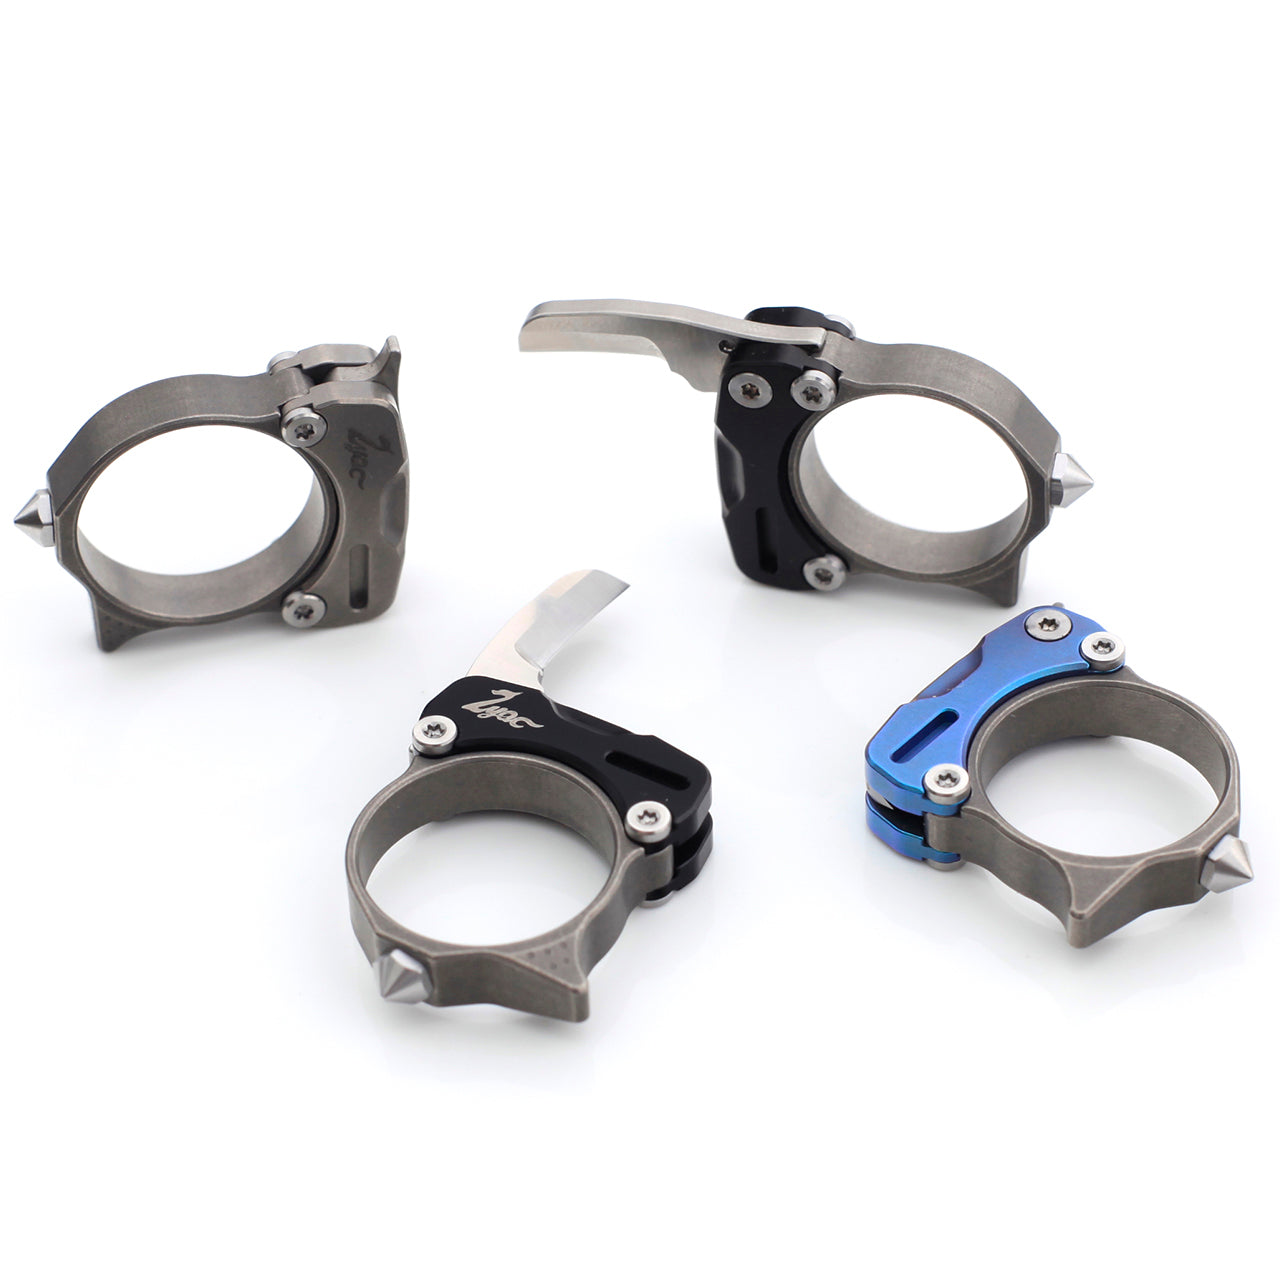 Titanium Knife Ring with M390 Mini Blade – Zyac knives